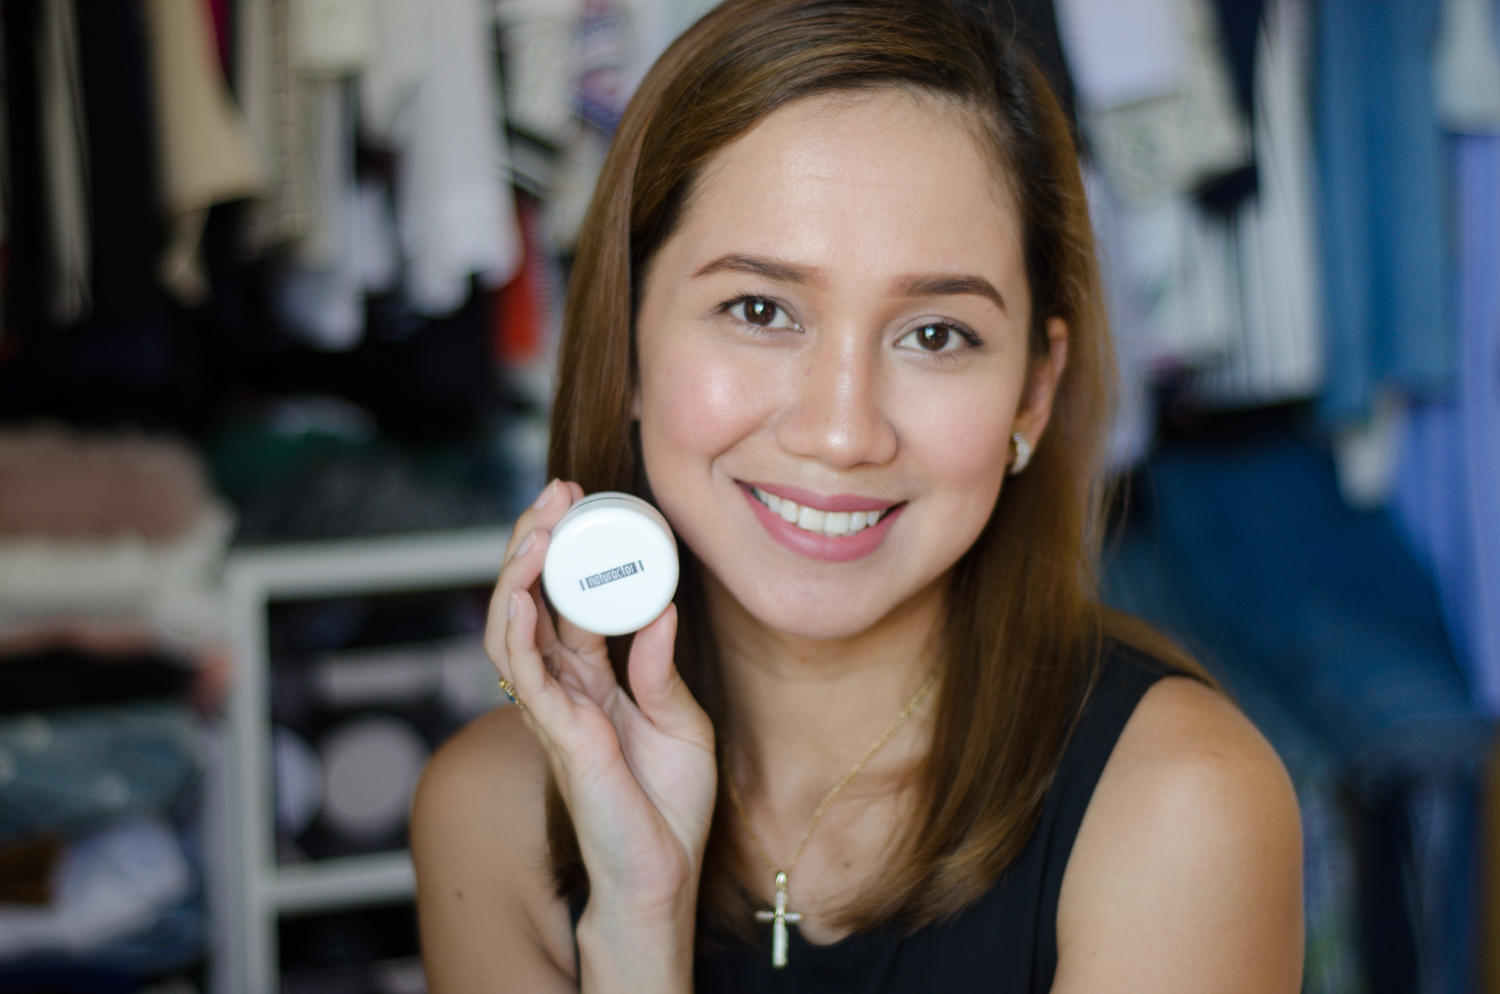 Beauty, Blog, Reviews, Beauty Reviews, Makeup Haul, How to Use Naturactor Cover Face Concealer, Silky Lucent Loose Powder, Philippine Beauty Blogger, Cebu Beauty Blogger, Makeup, Tutorial, Cebu Fashion Blogger, Cebu Blogger, Asian, Let's Stylize Cosmetics, Toni Pino-Oca